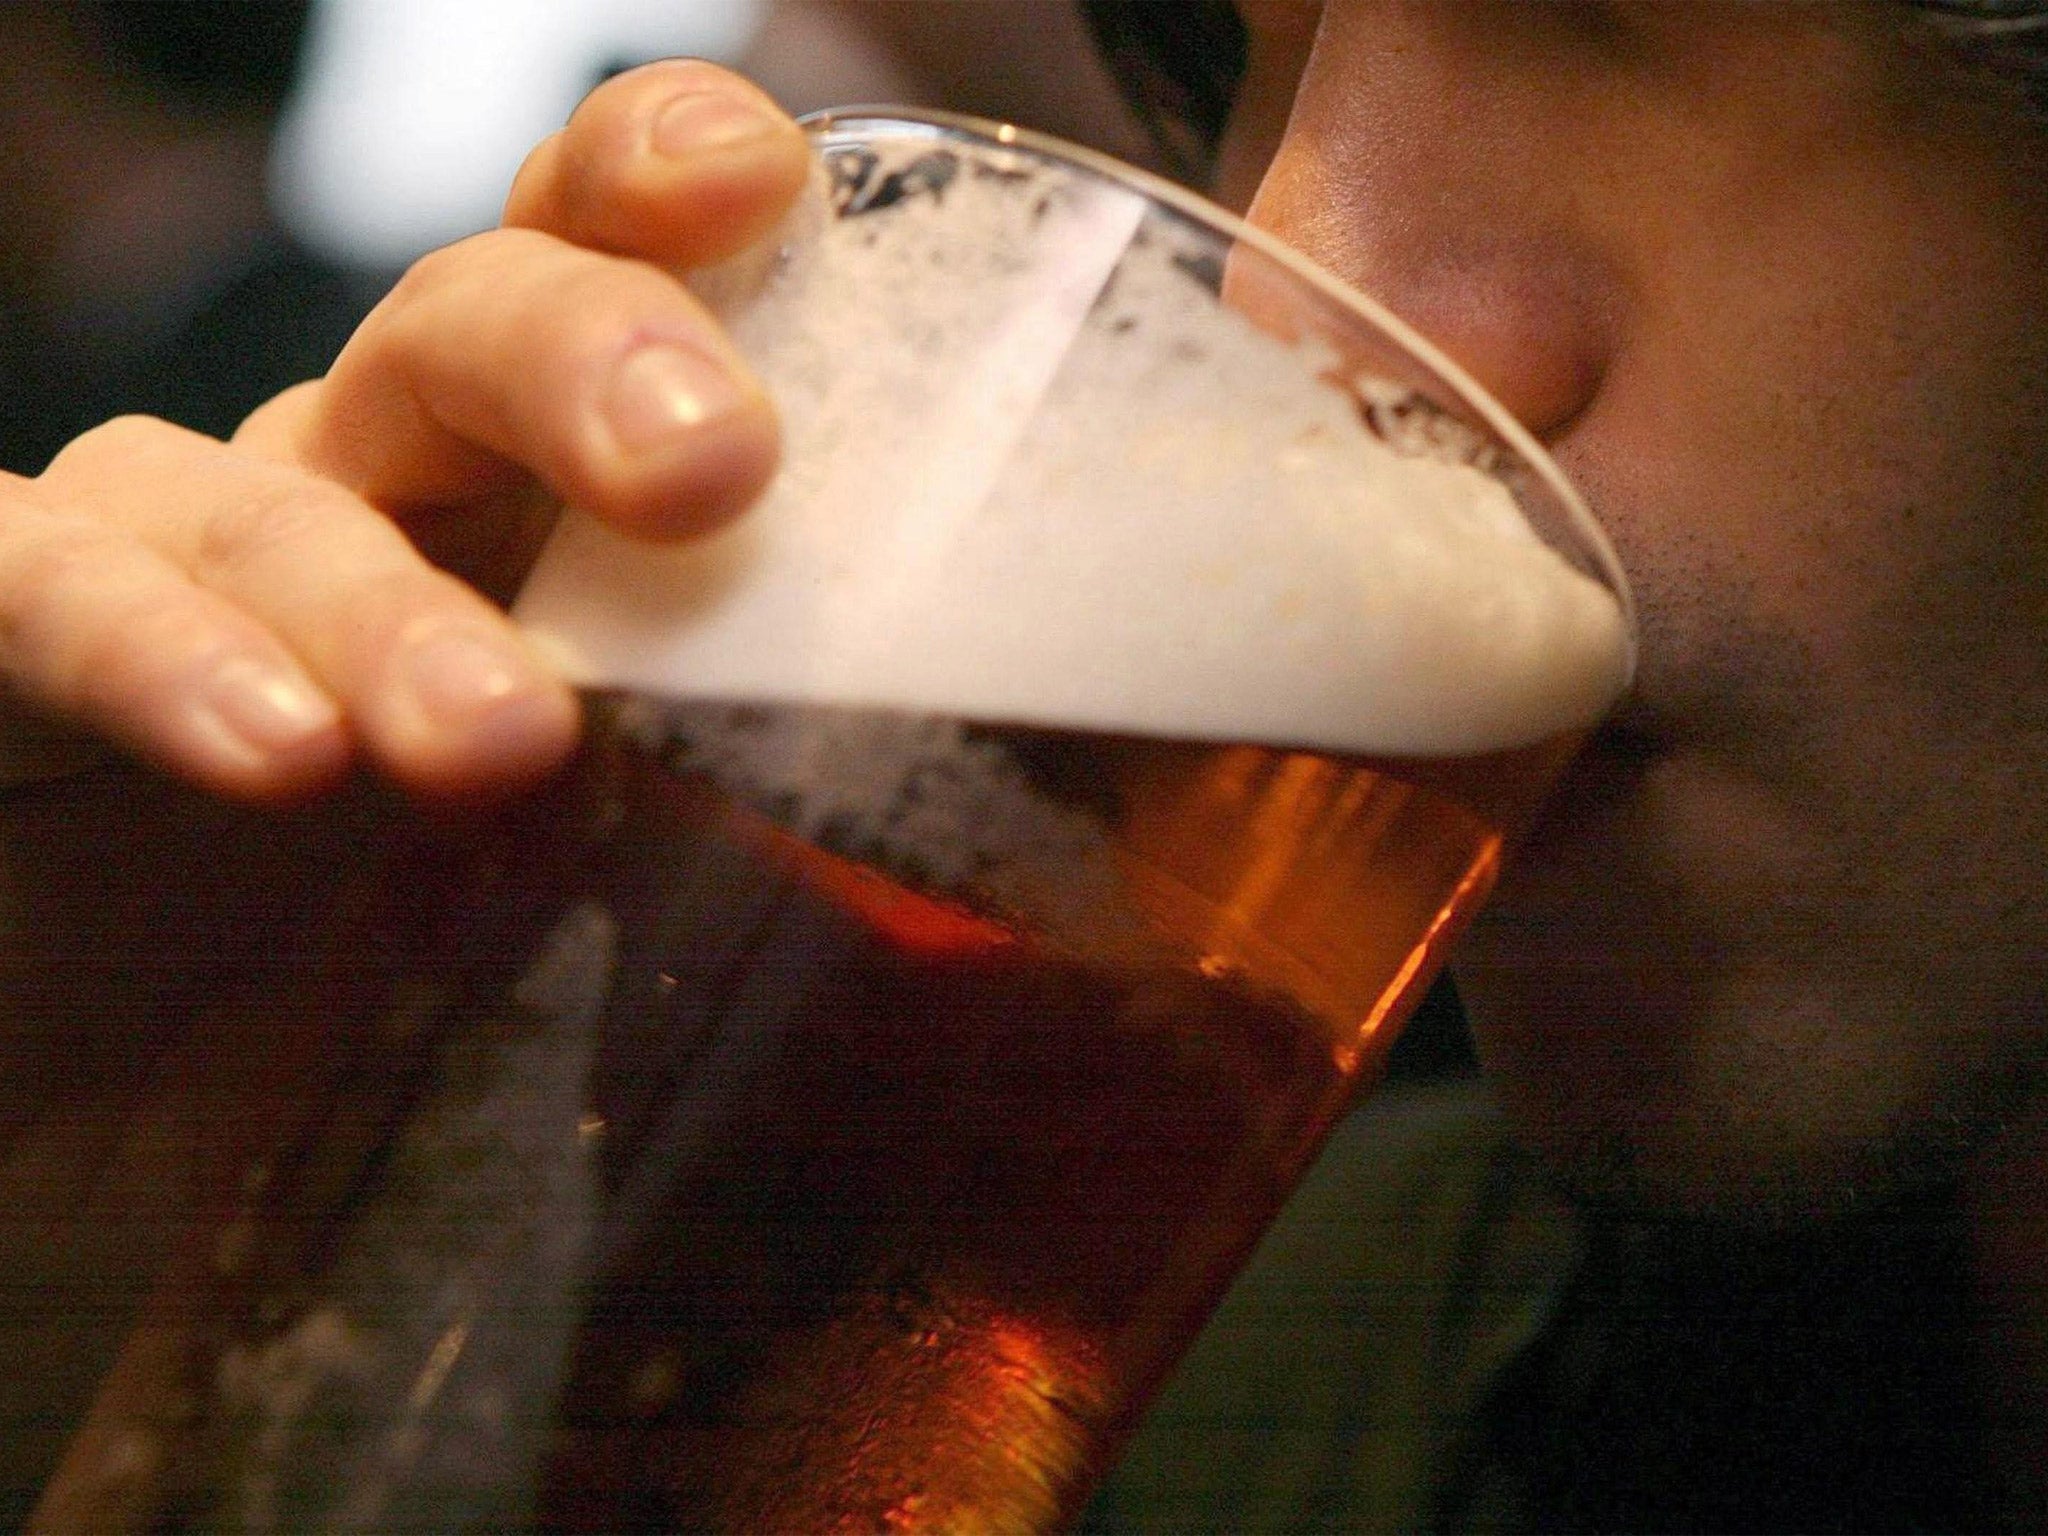 The current recommendation from Britain's Chief Medical Officer, is that people should refrain from drinking on at least two days a week